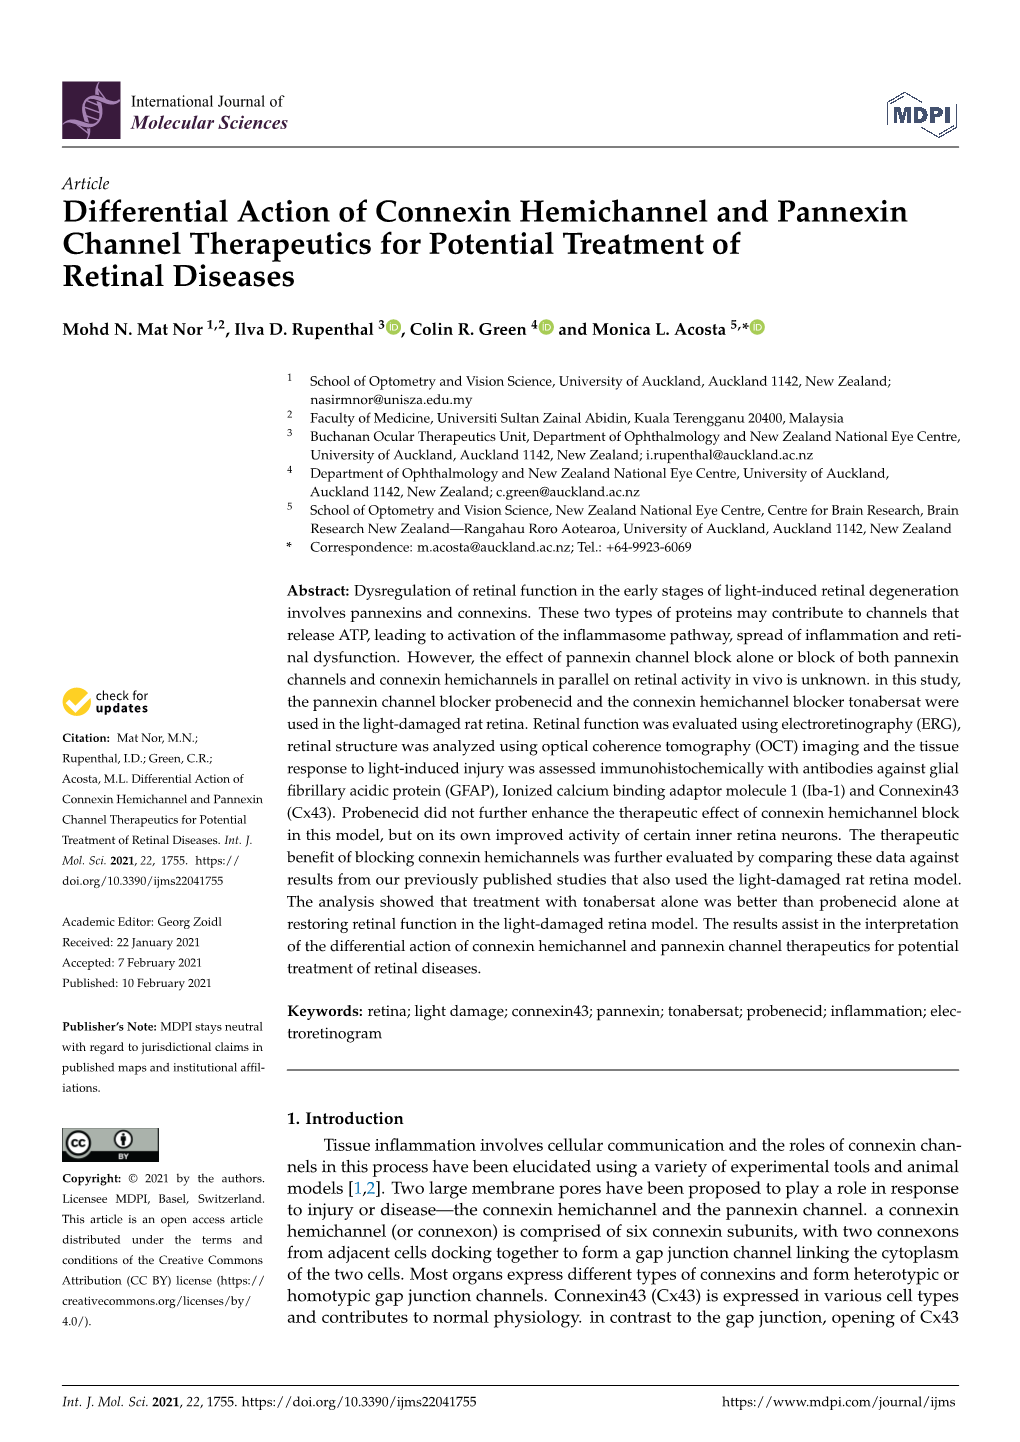 Differential Action of Connexin Hemichannel and Pannexin Channel Therapeutics for Potential Treatment of Retinal Diseases